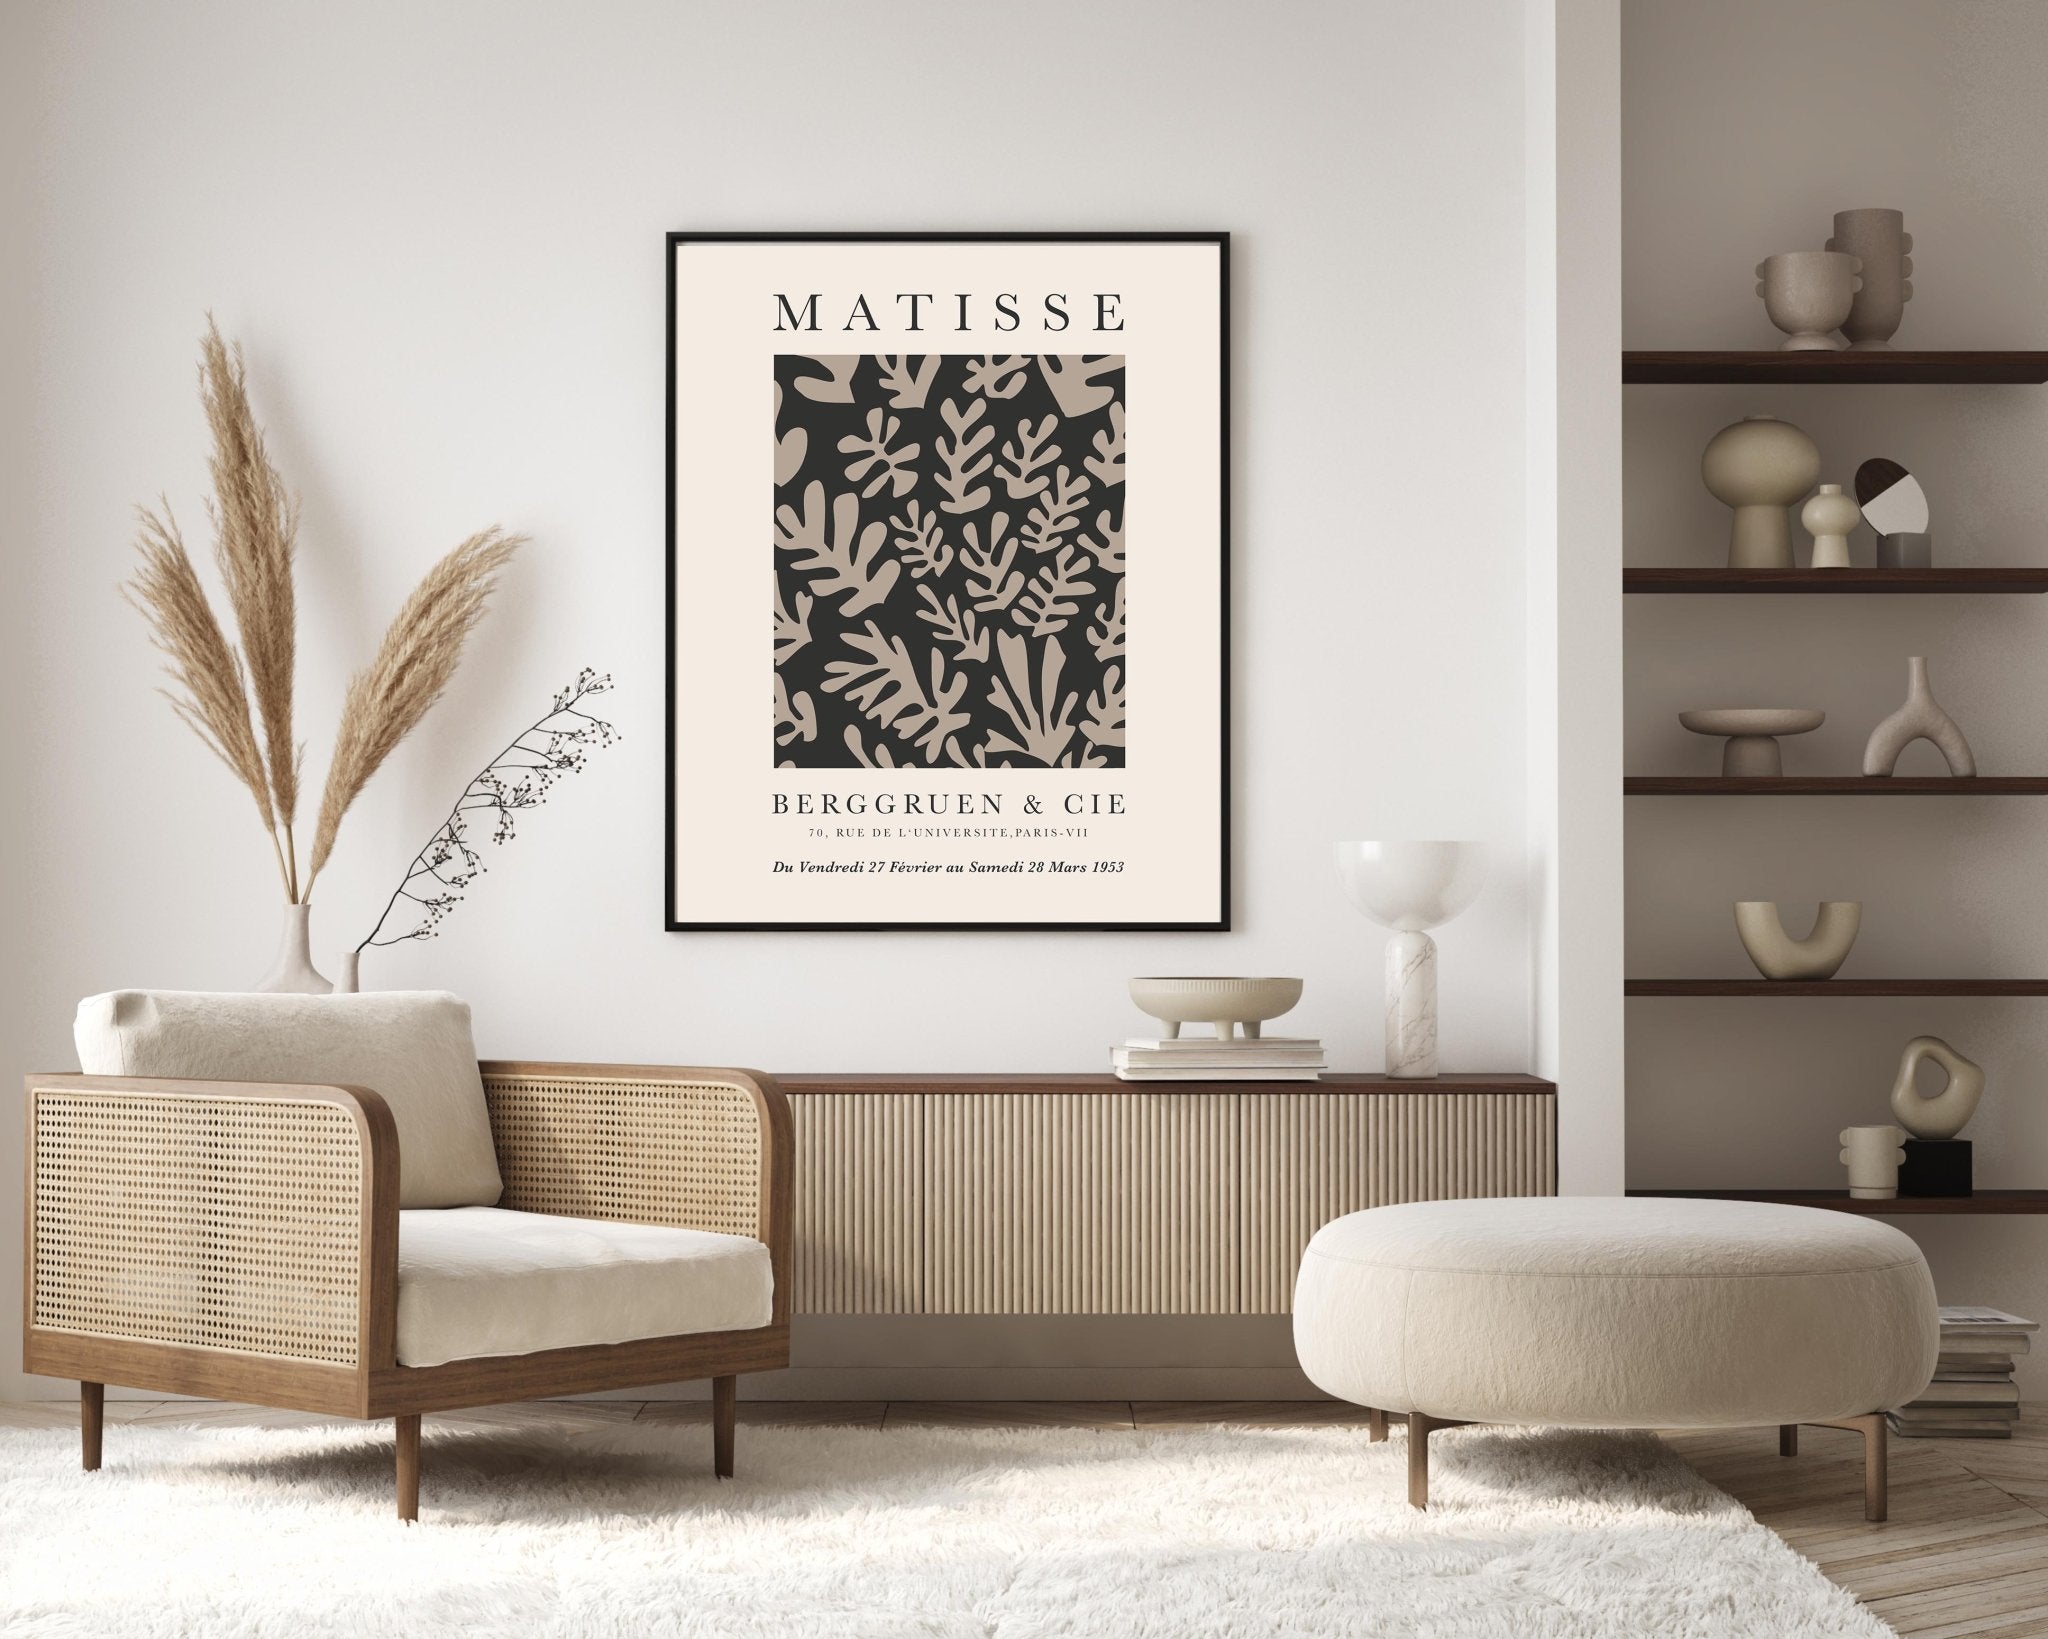 Matisse Cut-Out Exhibition Poster - D'Luxe Prints